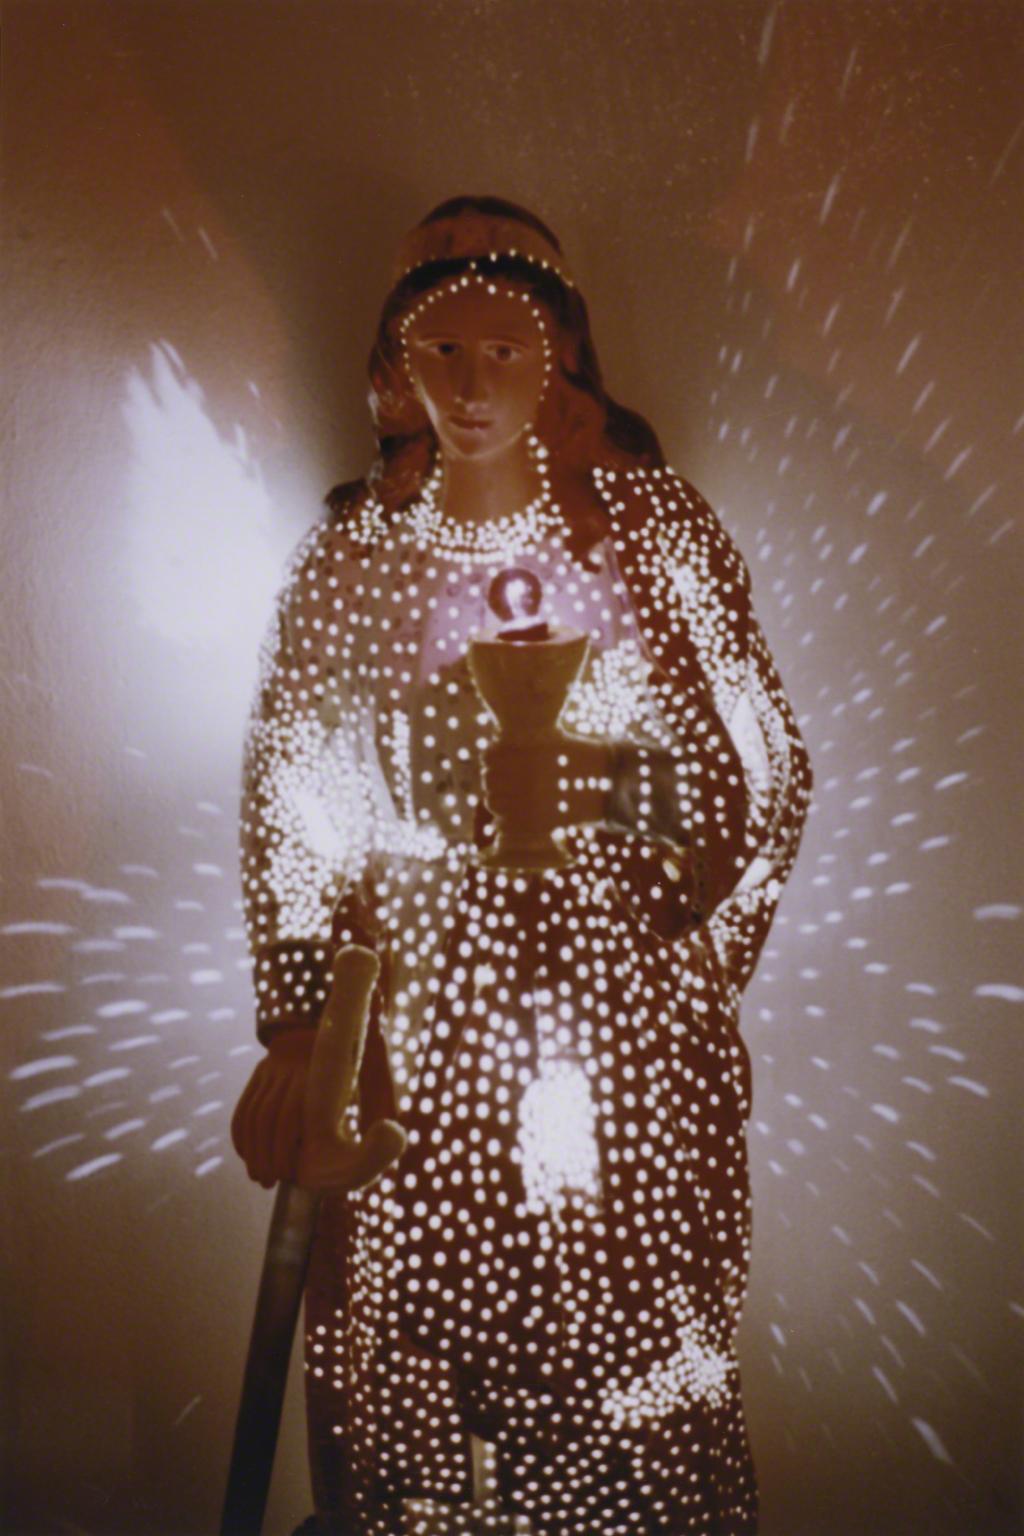 Color photograph of a Christian saint carrying a sword and chalice that is light from the inside and casting light on the wall behind